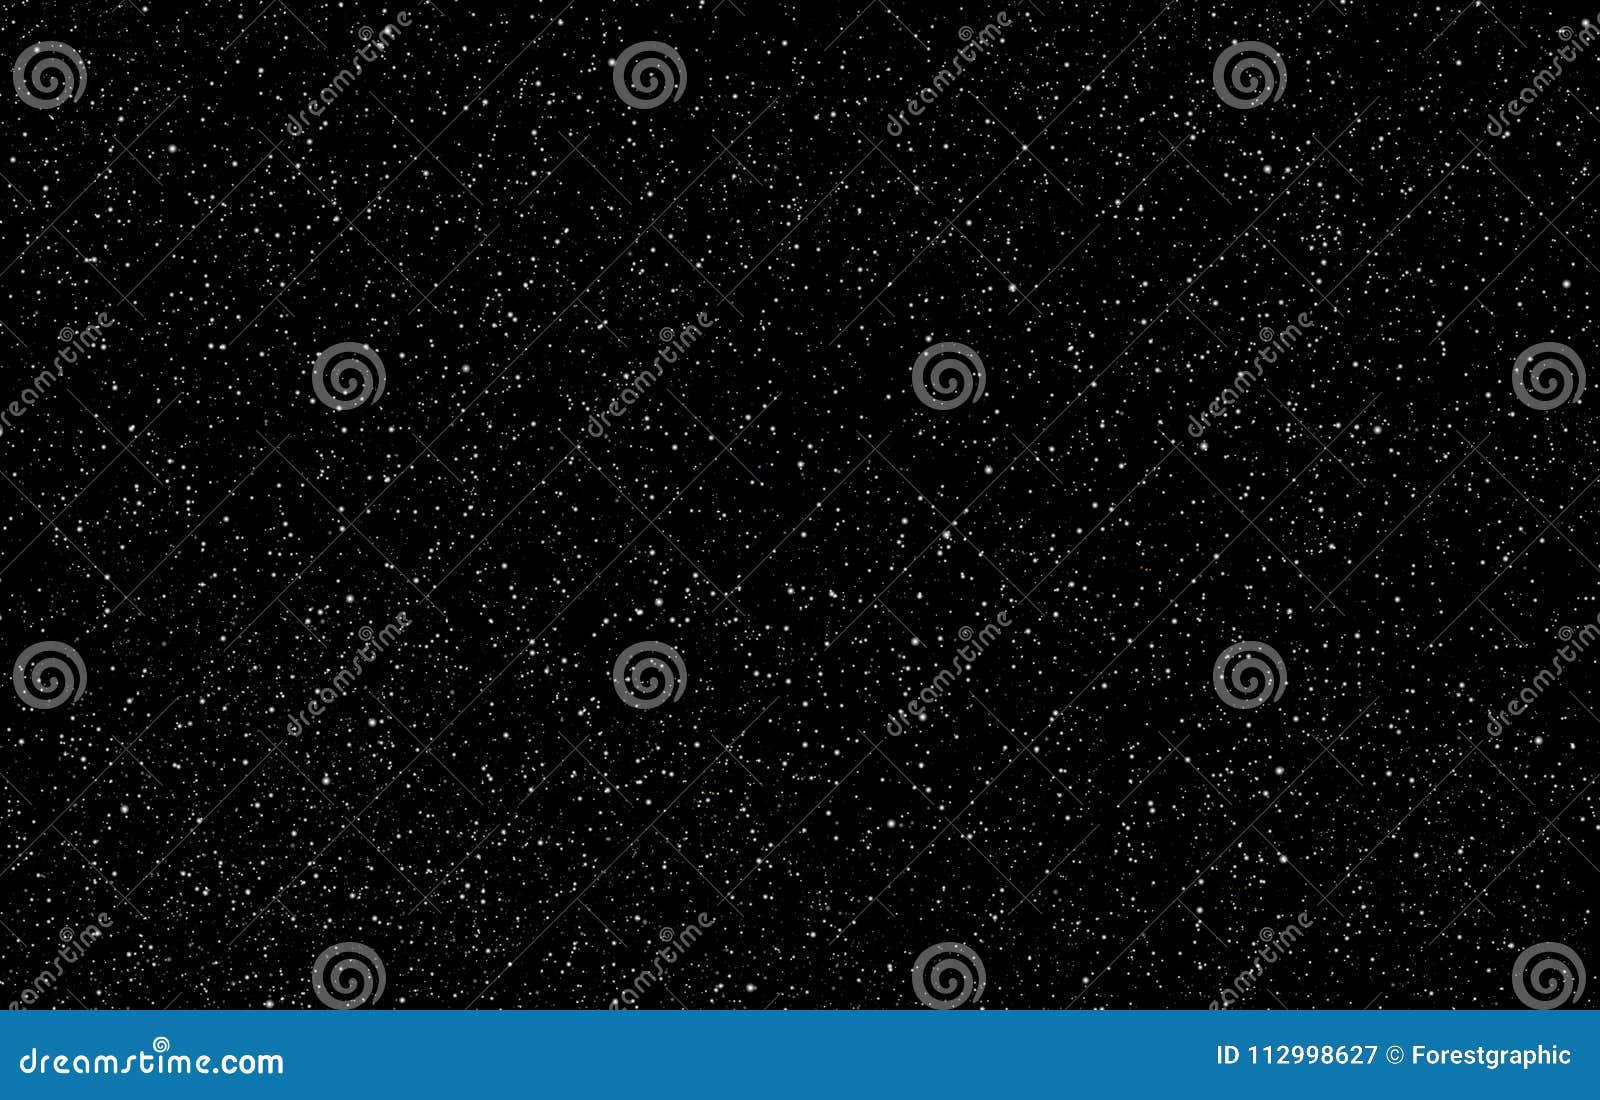 perfect starry night sky background - outer space  background